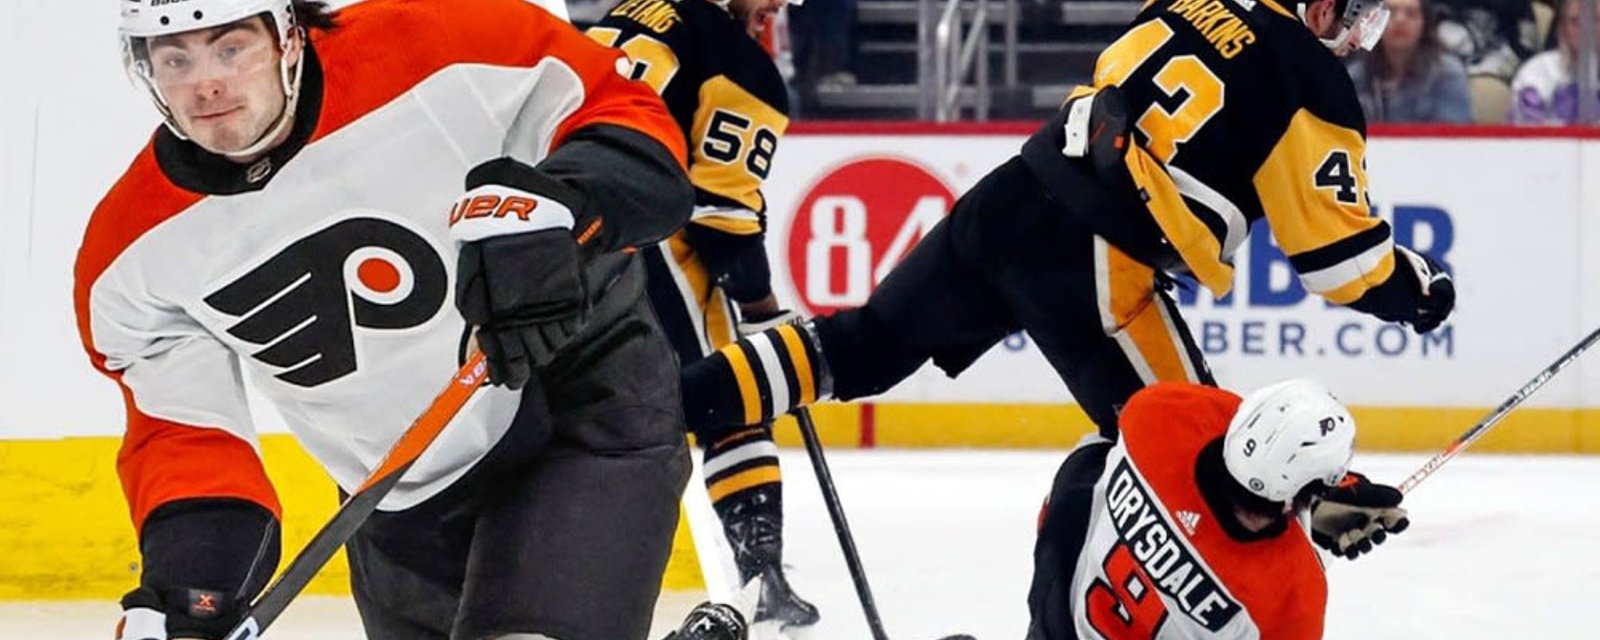 The worst is confirmed for Flyers defenseman Jamie Drysdale